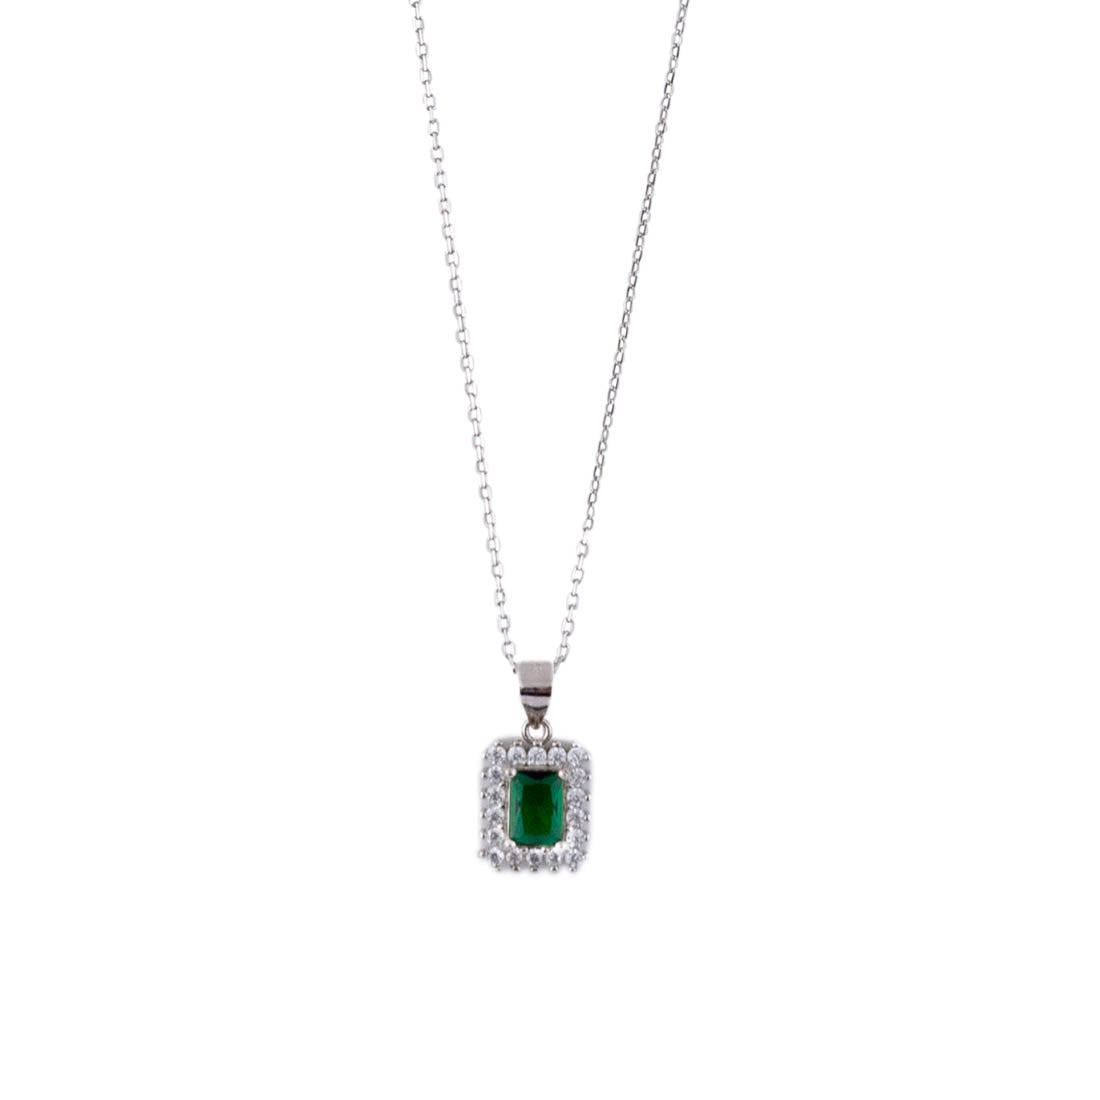 Silver Set Chain Rectangular Pendant with Earrings with Green Stones for Women